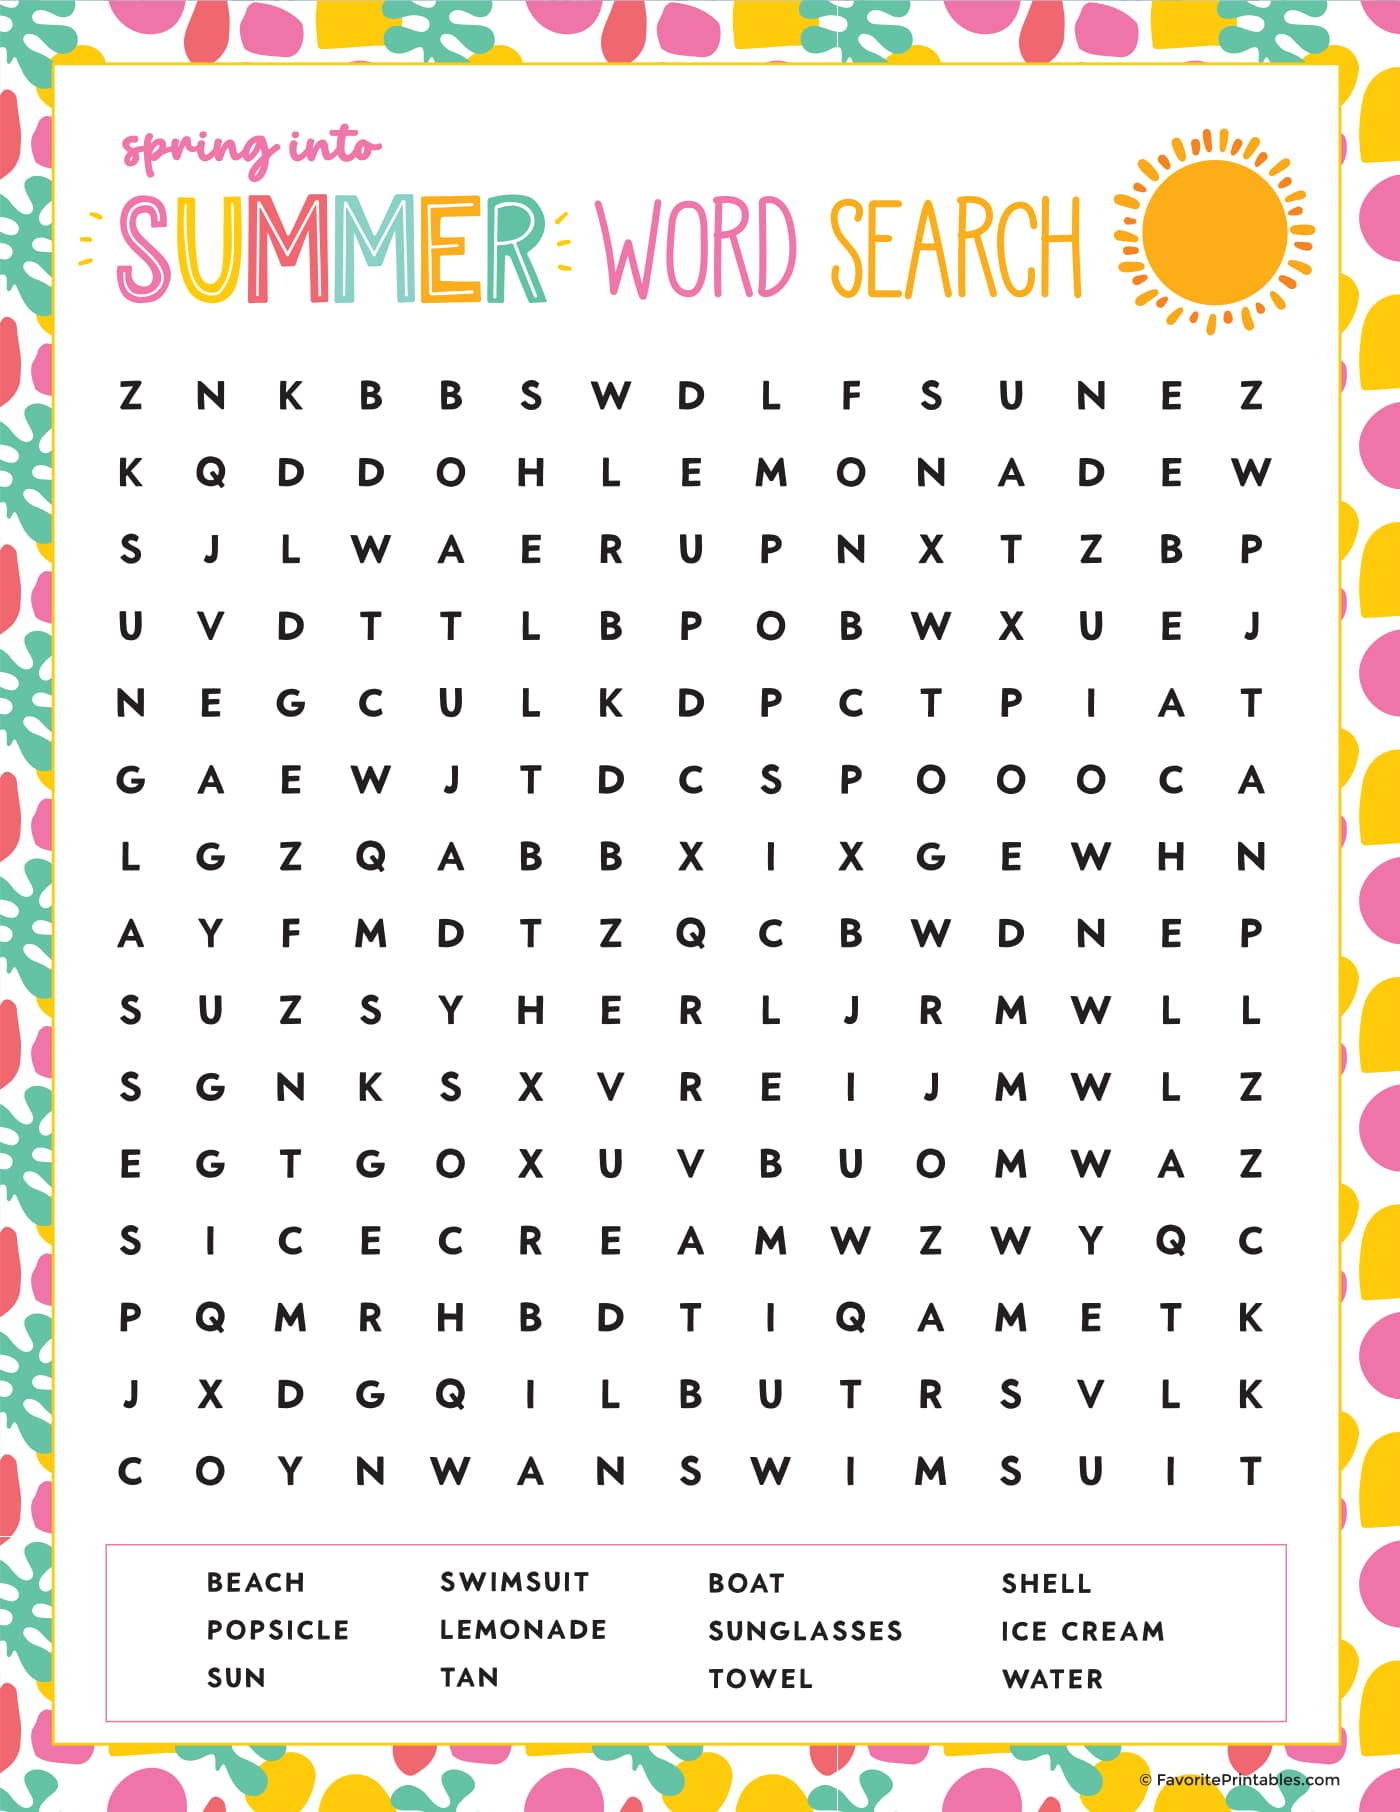 Summer word search printable preview.